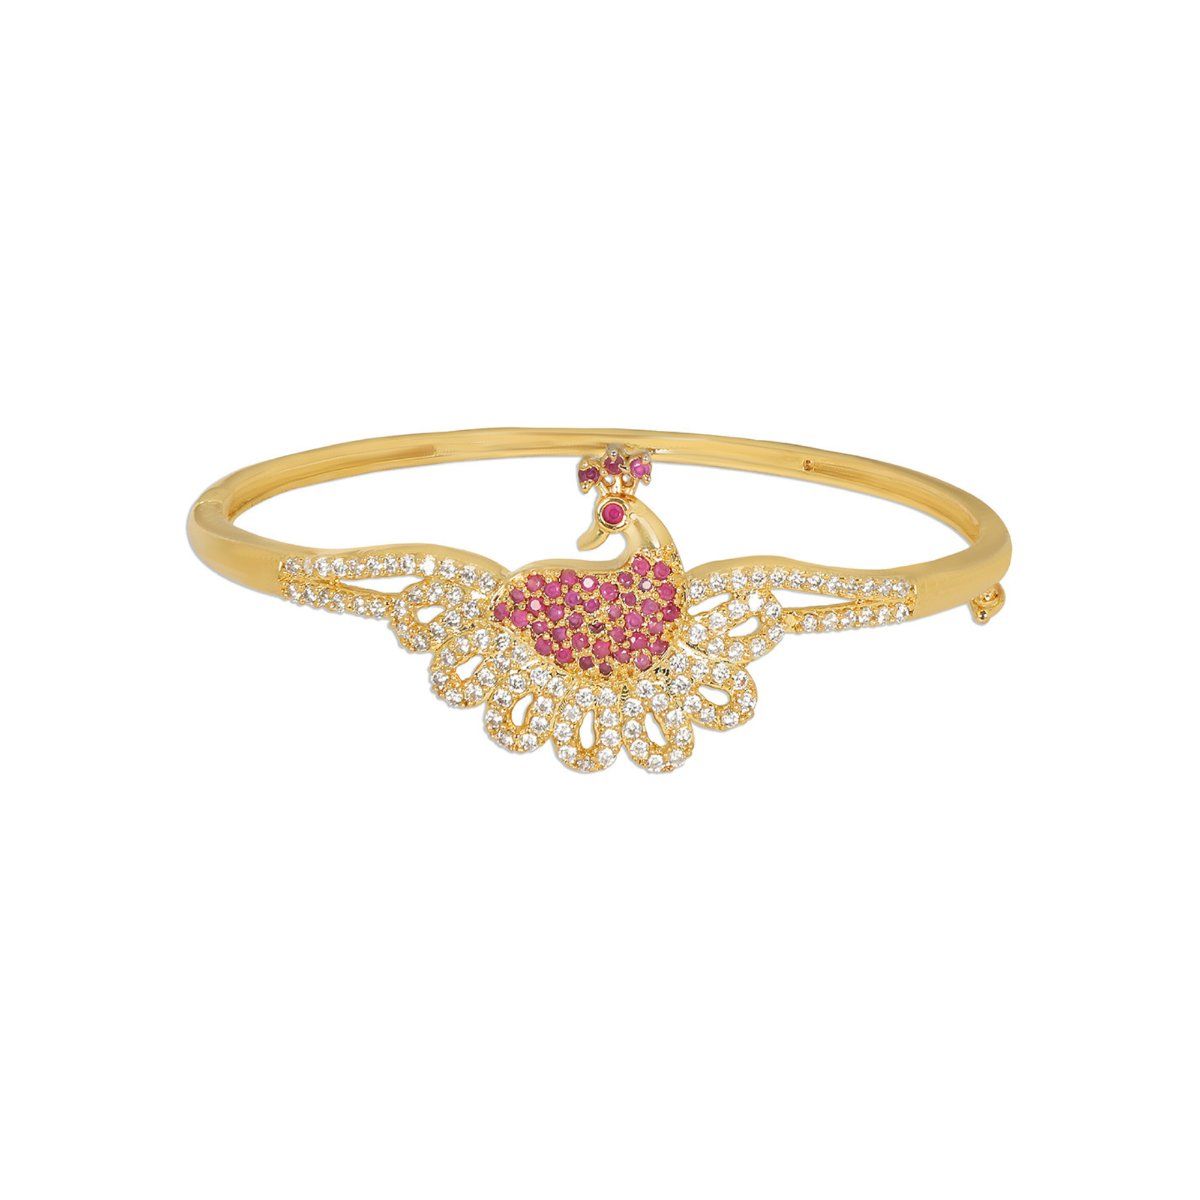 Buy New Fashion Gold Covering White and Ruby Stone Peacock Gold Kada Design  Openable Bracelet